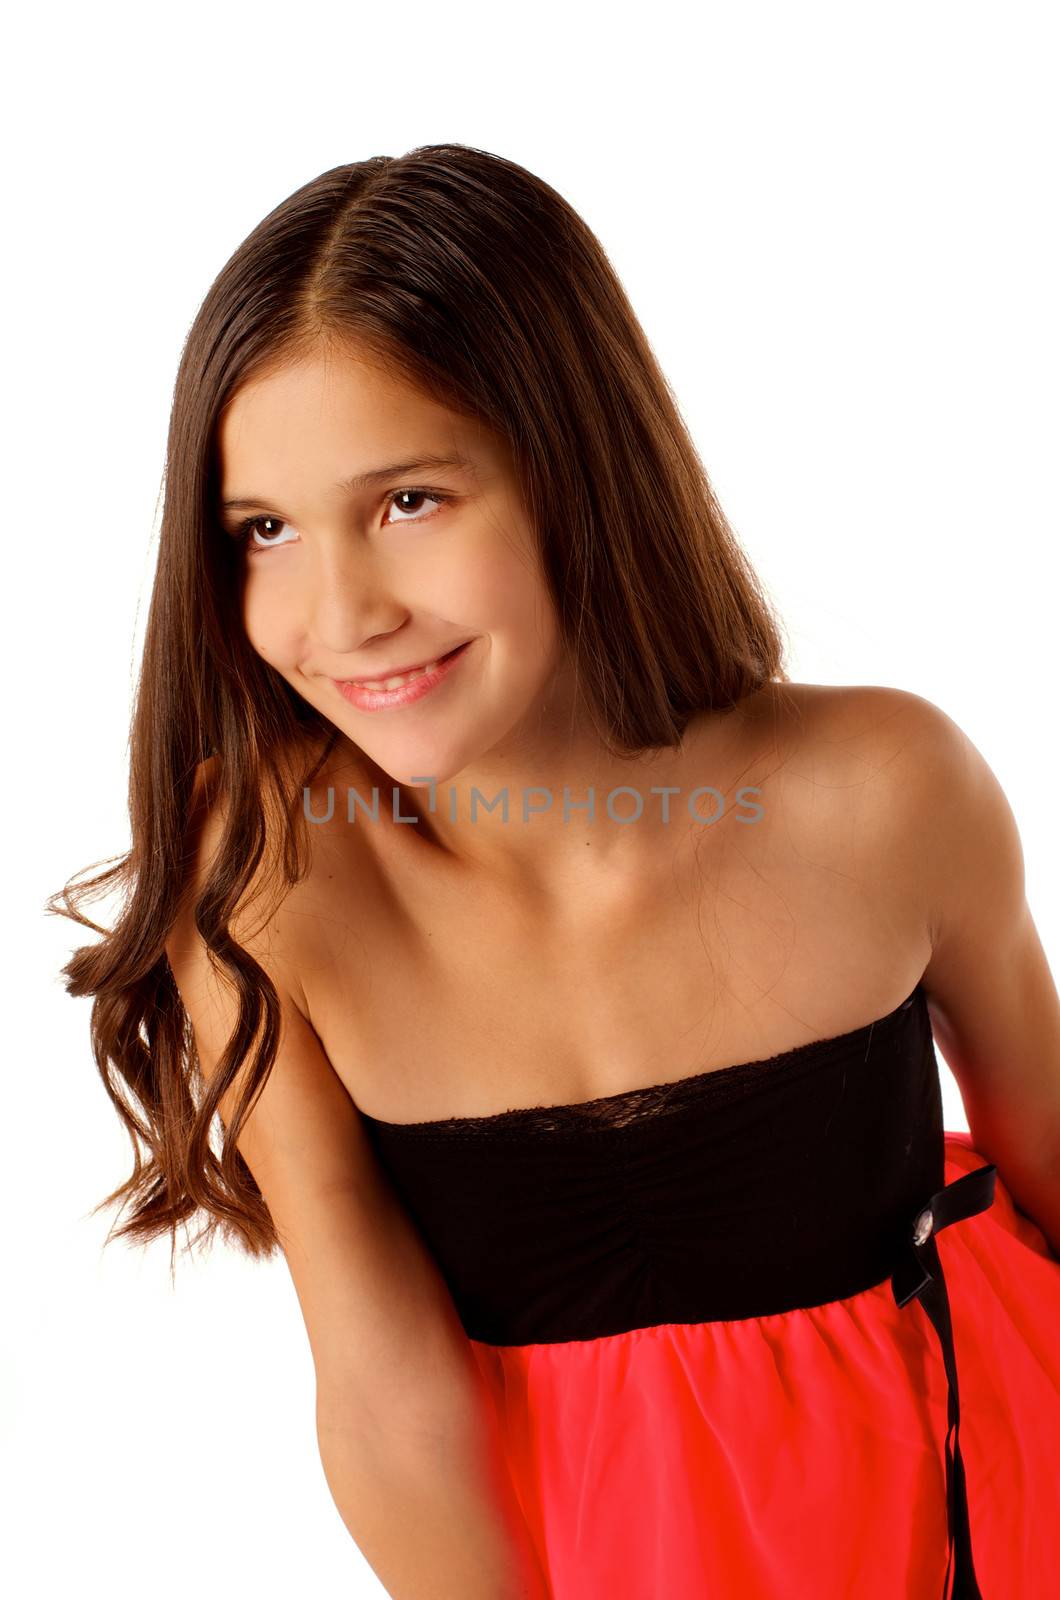 Cheerful Attractive Teen Girl with Long Beautiful Hair in Black and Pink Dress  isolated on white background